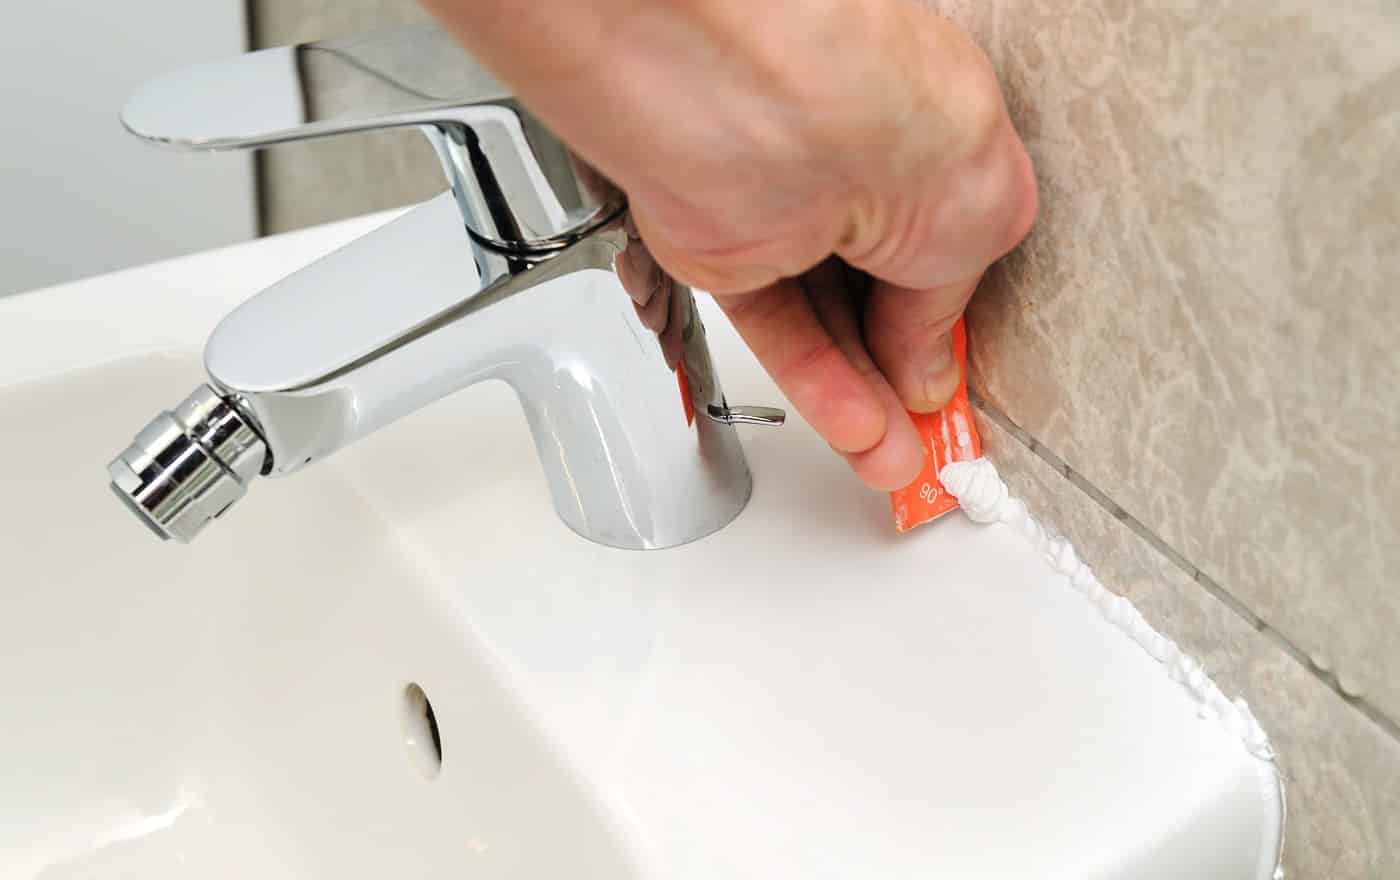 Worker smoothing silicone sealant between the bidet and the wall using a spatula. Best Caulk For Showers And Bathtubs.